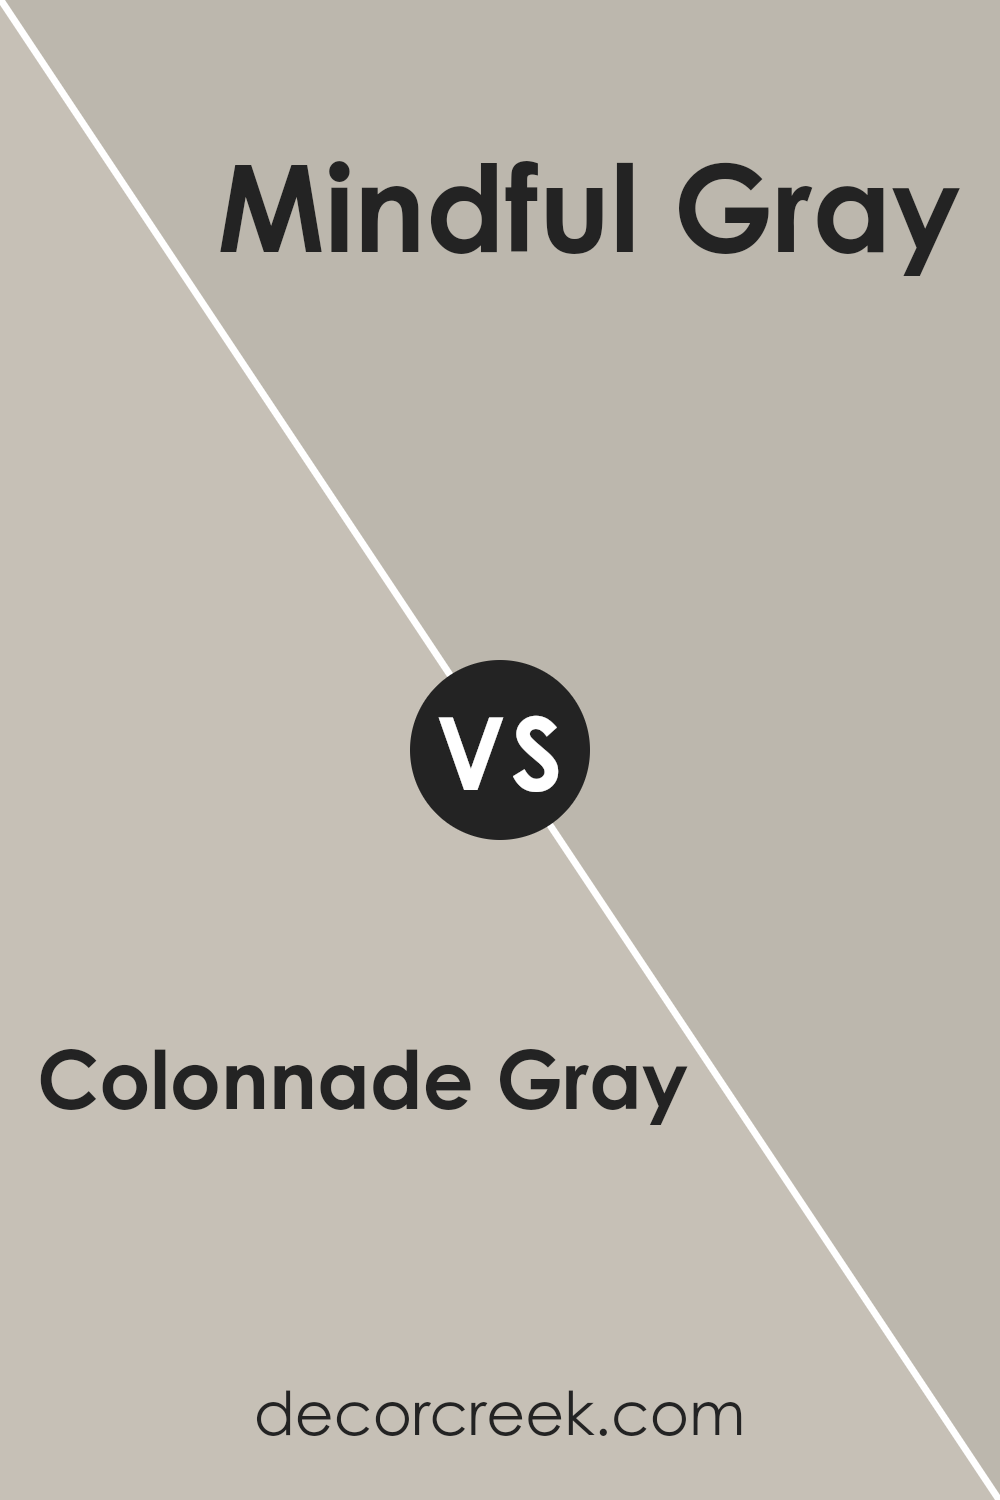 colonnade_gray_sw_7641_vs_mindful_gray_sw_7016